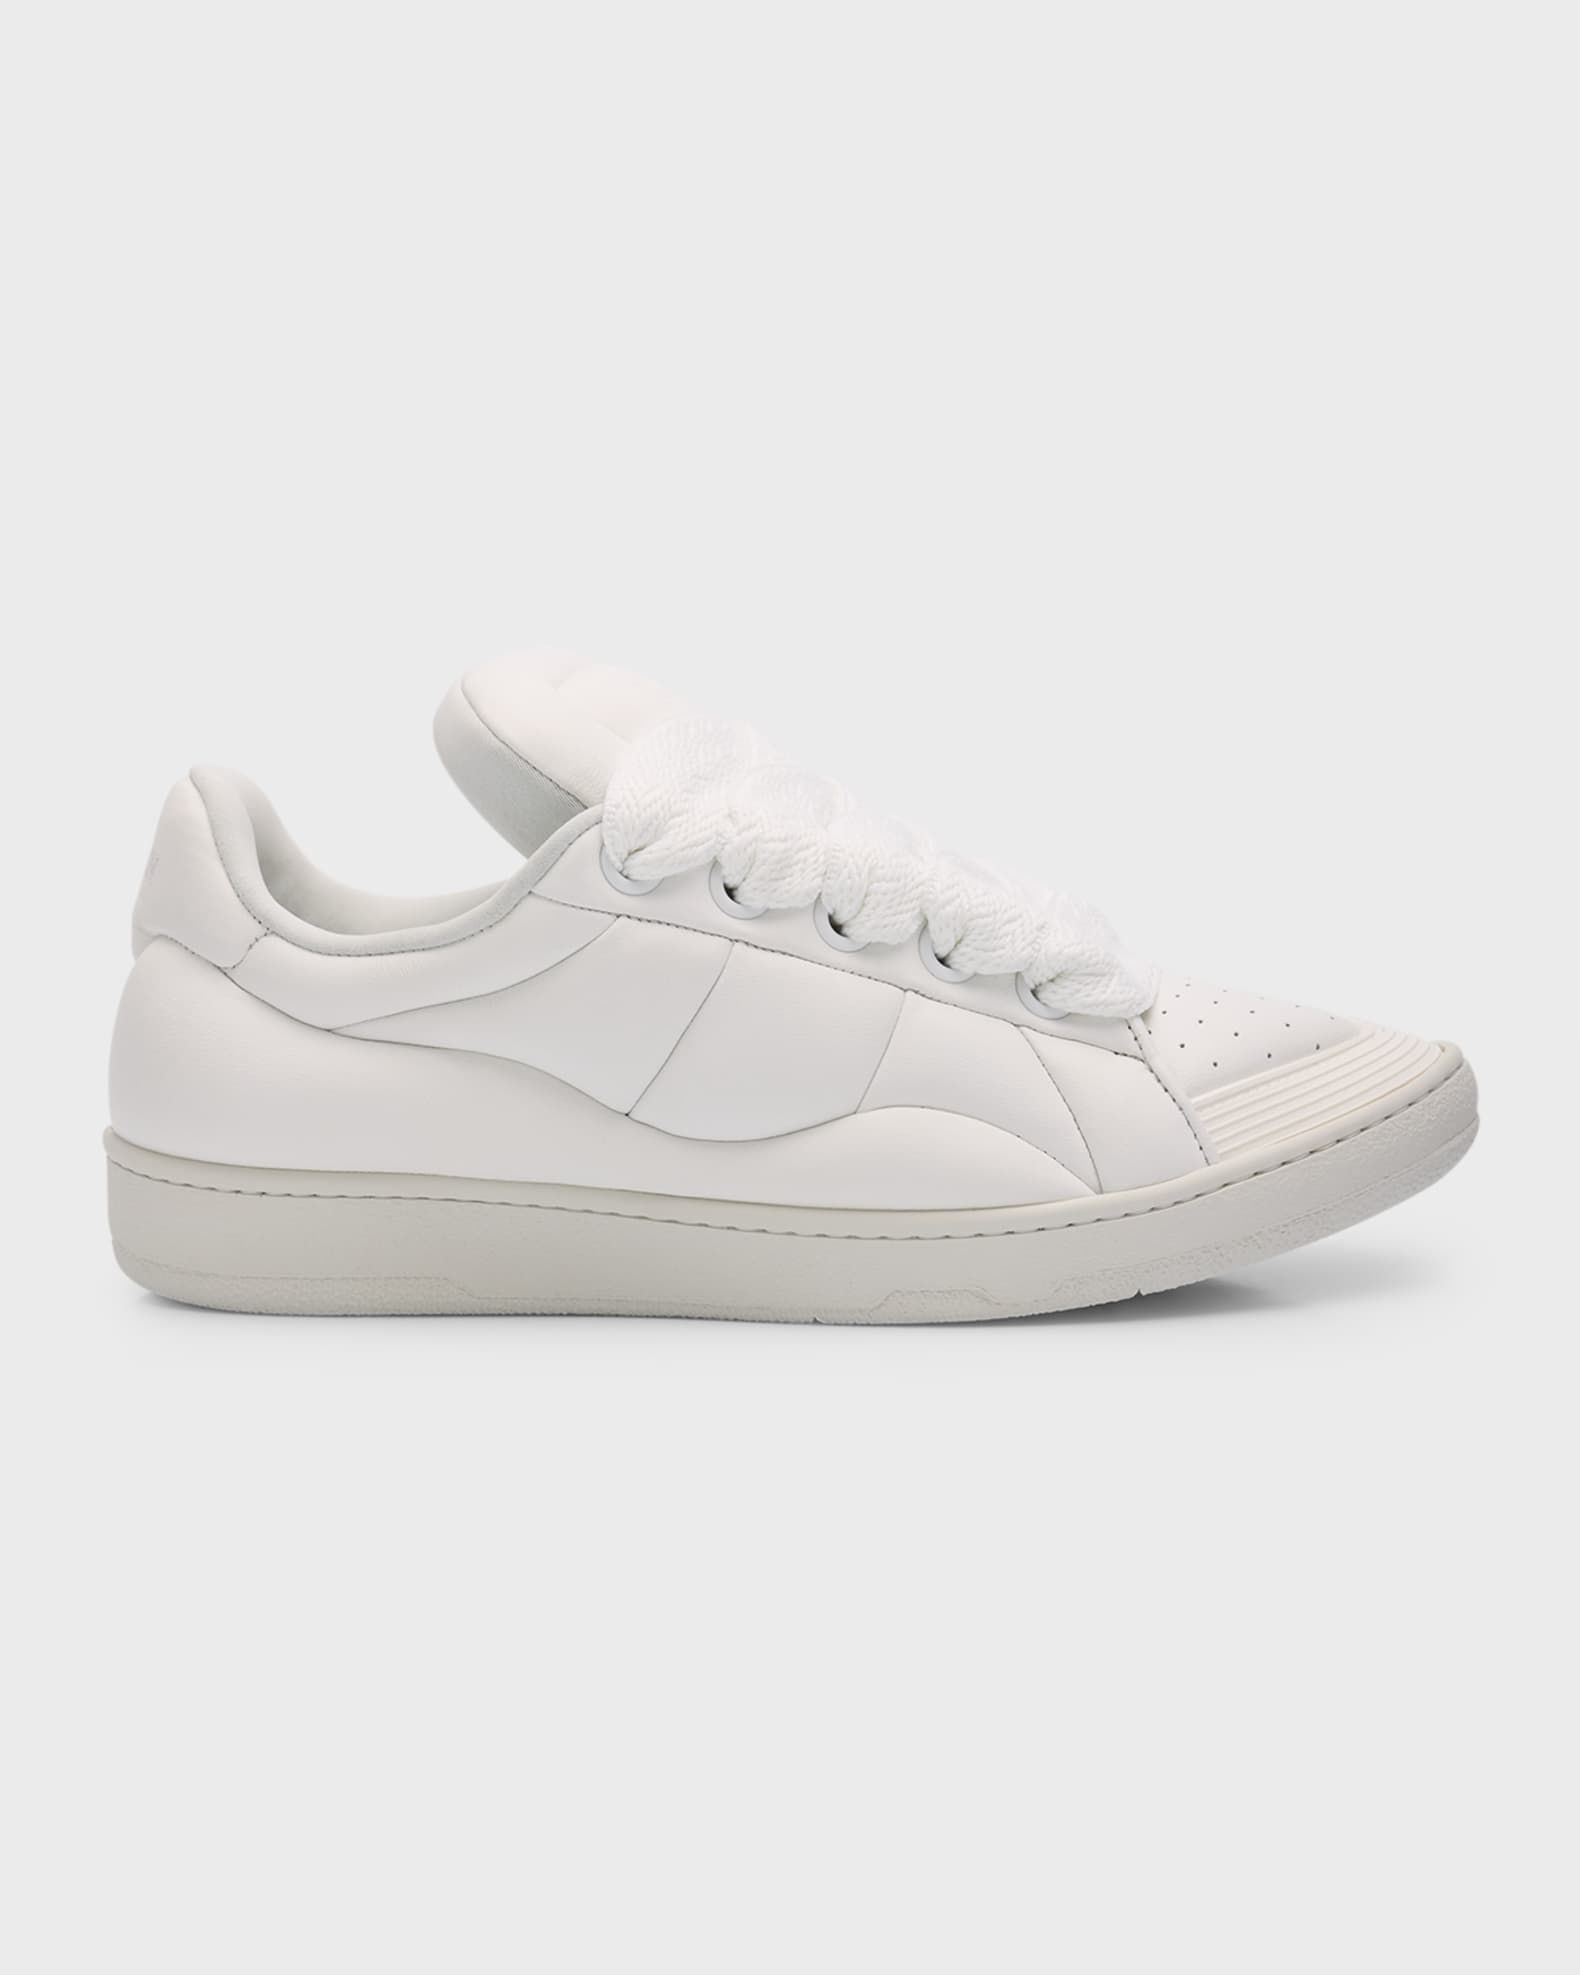 Luxury White Suede Designer Sneakers For Men And Women Calfskin Expensive  Casual Shoes With Platform Trainers From Luxuryshoes102, $67.8 | DHgate.Com